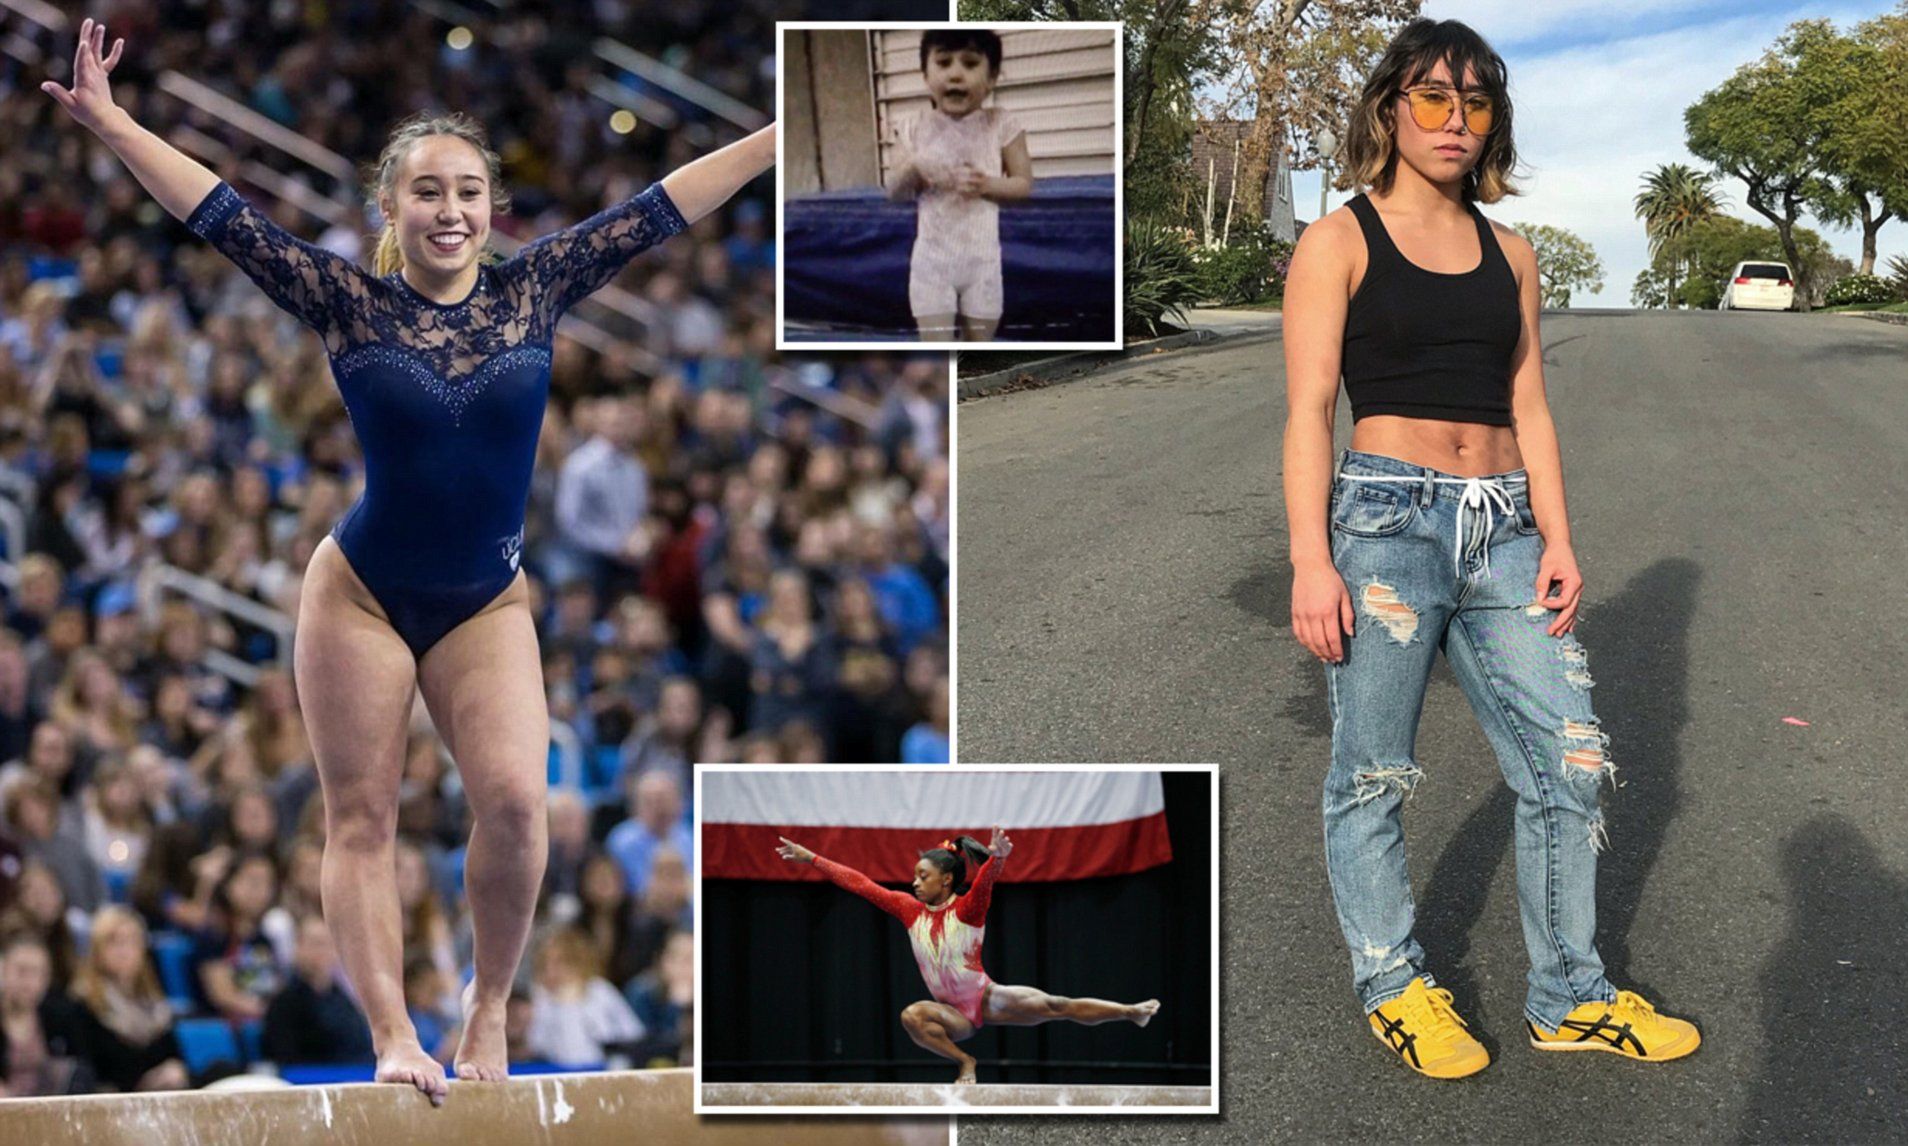 catherine malley recommends katelyn ohashi butt pic